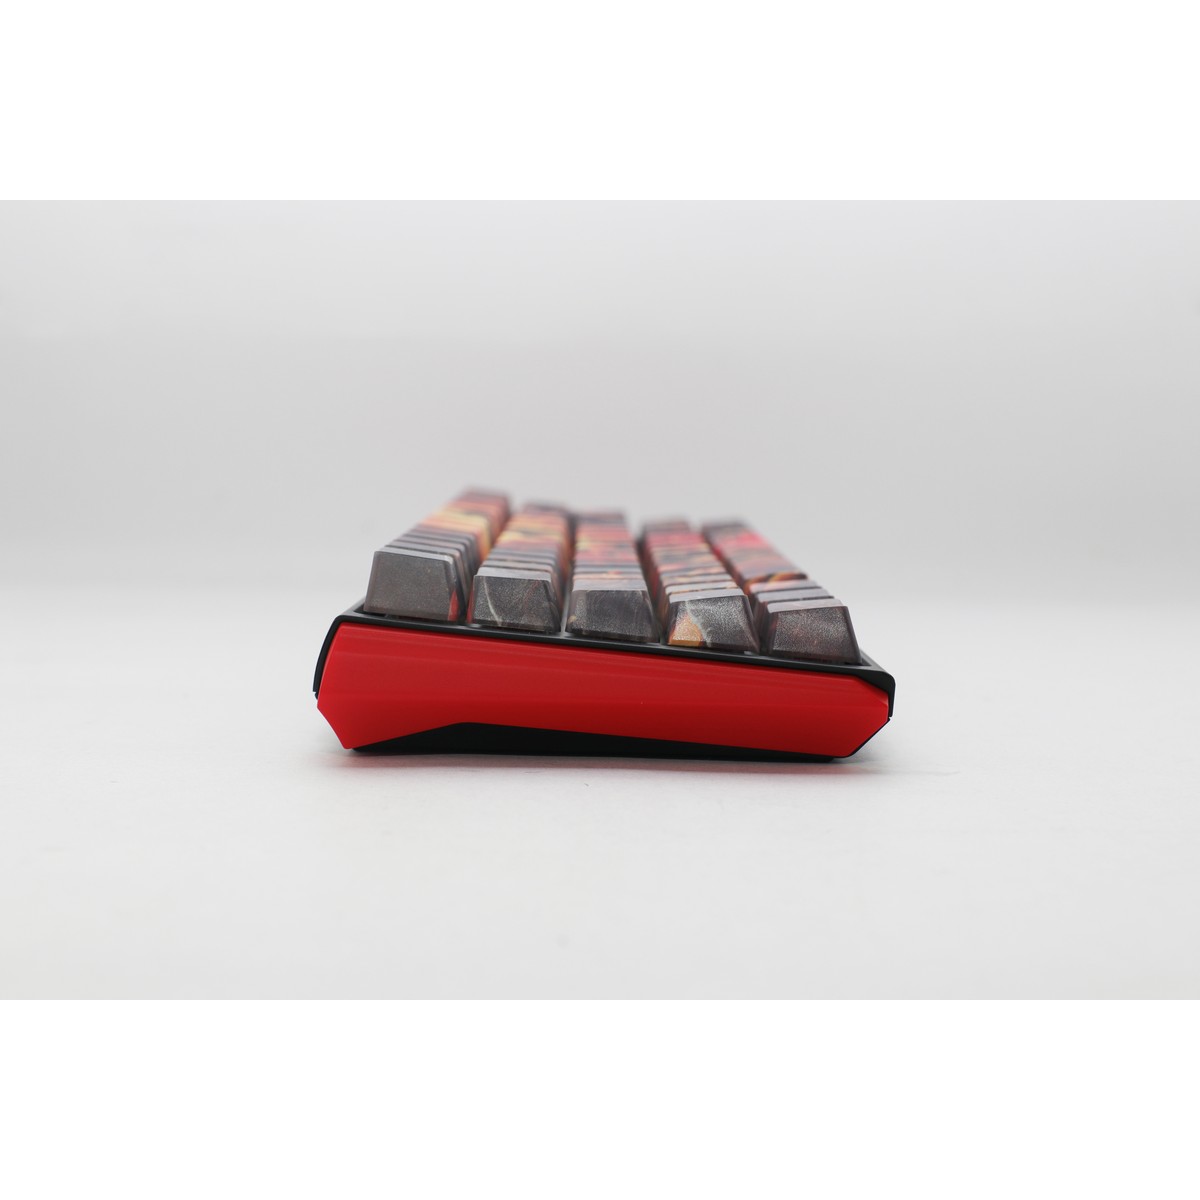 Ducky - Ducky x DOOM SF 65% Gaming Keyboard Limited Edition Cherry MX Silent Red Switche